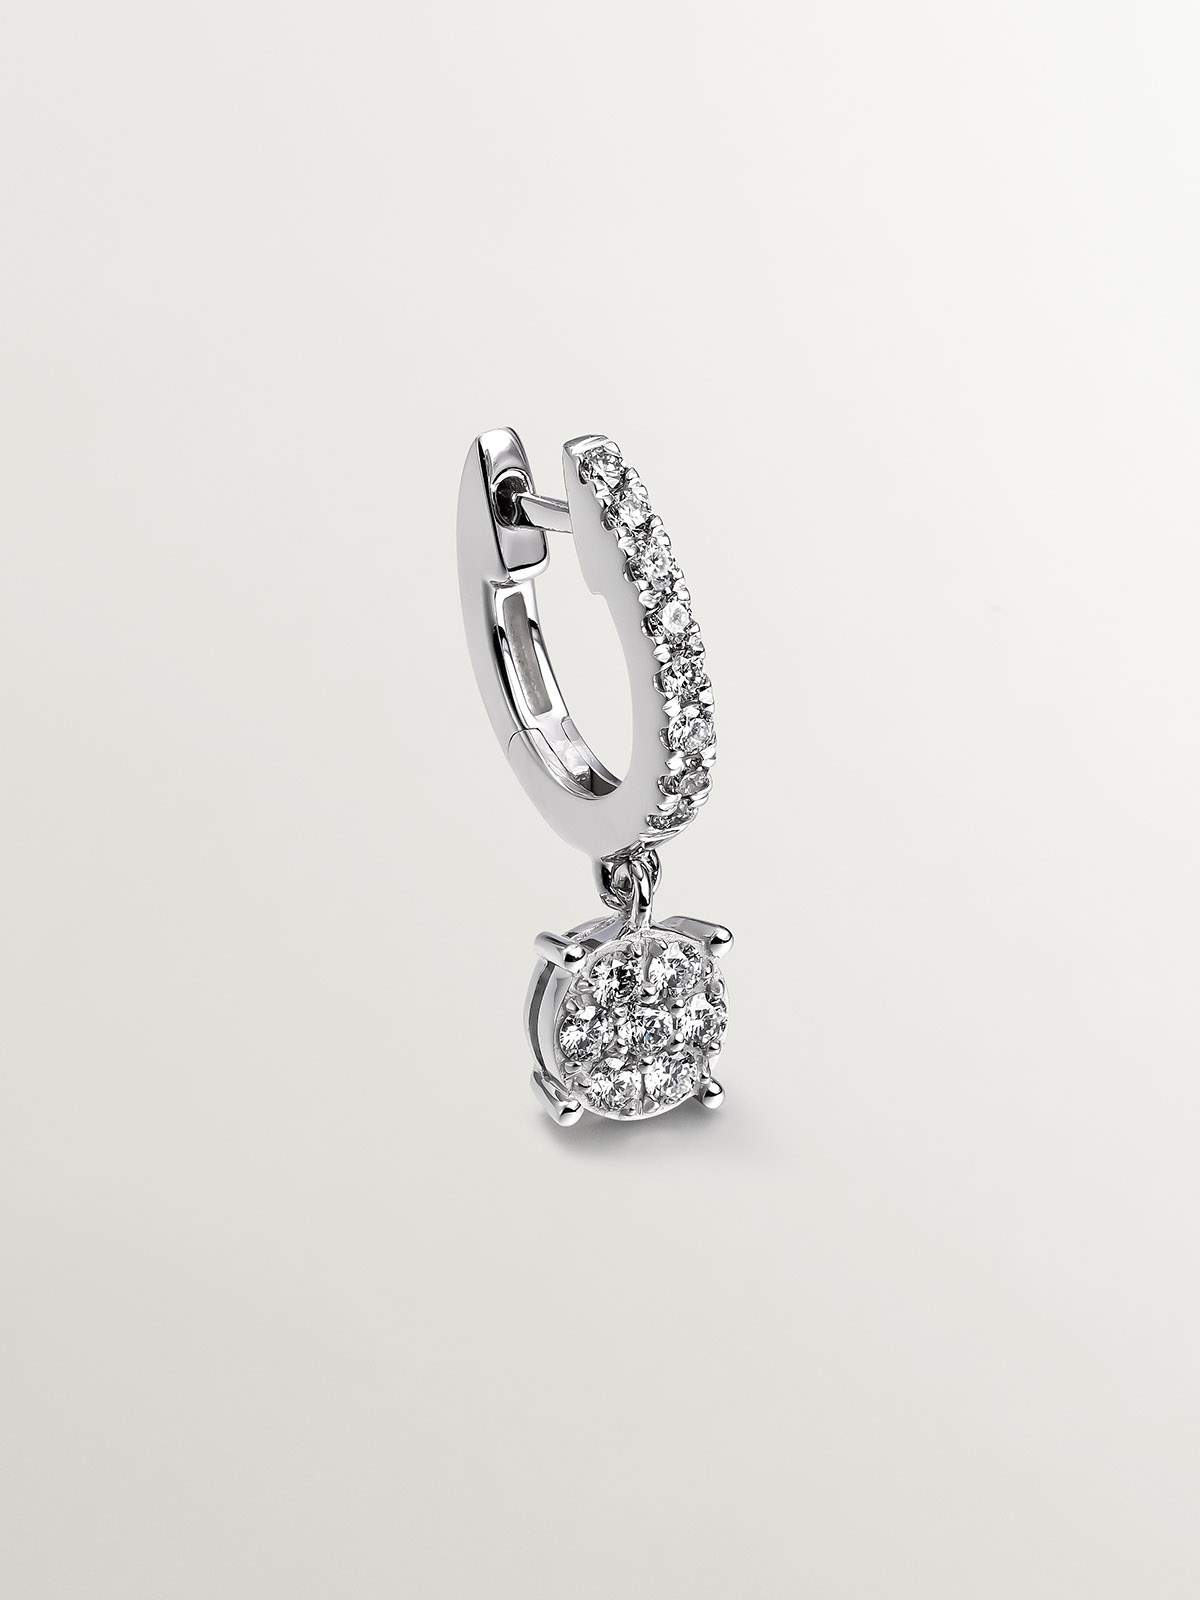 Individual 18K white gold earring with diamond pavé and hanging diamond.